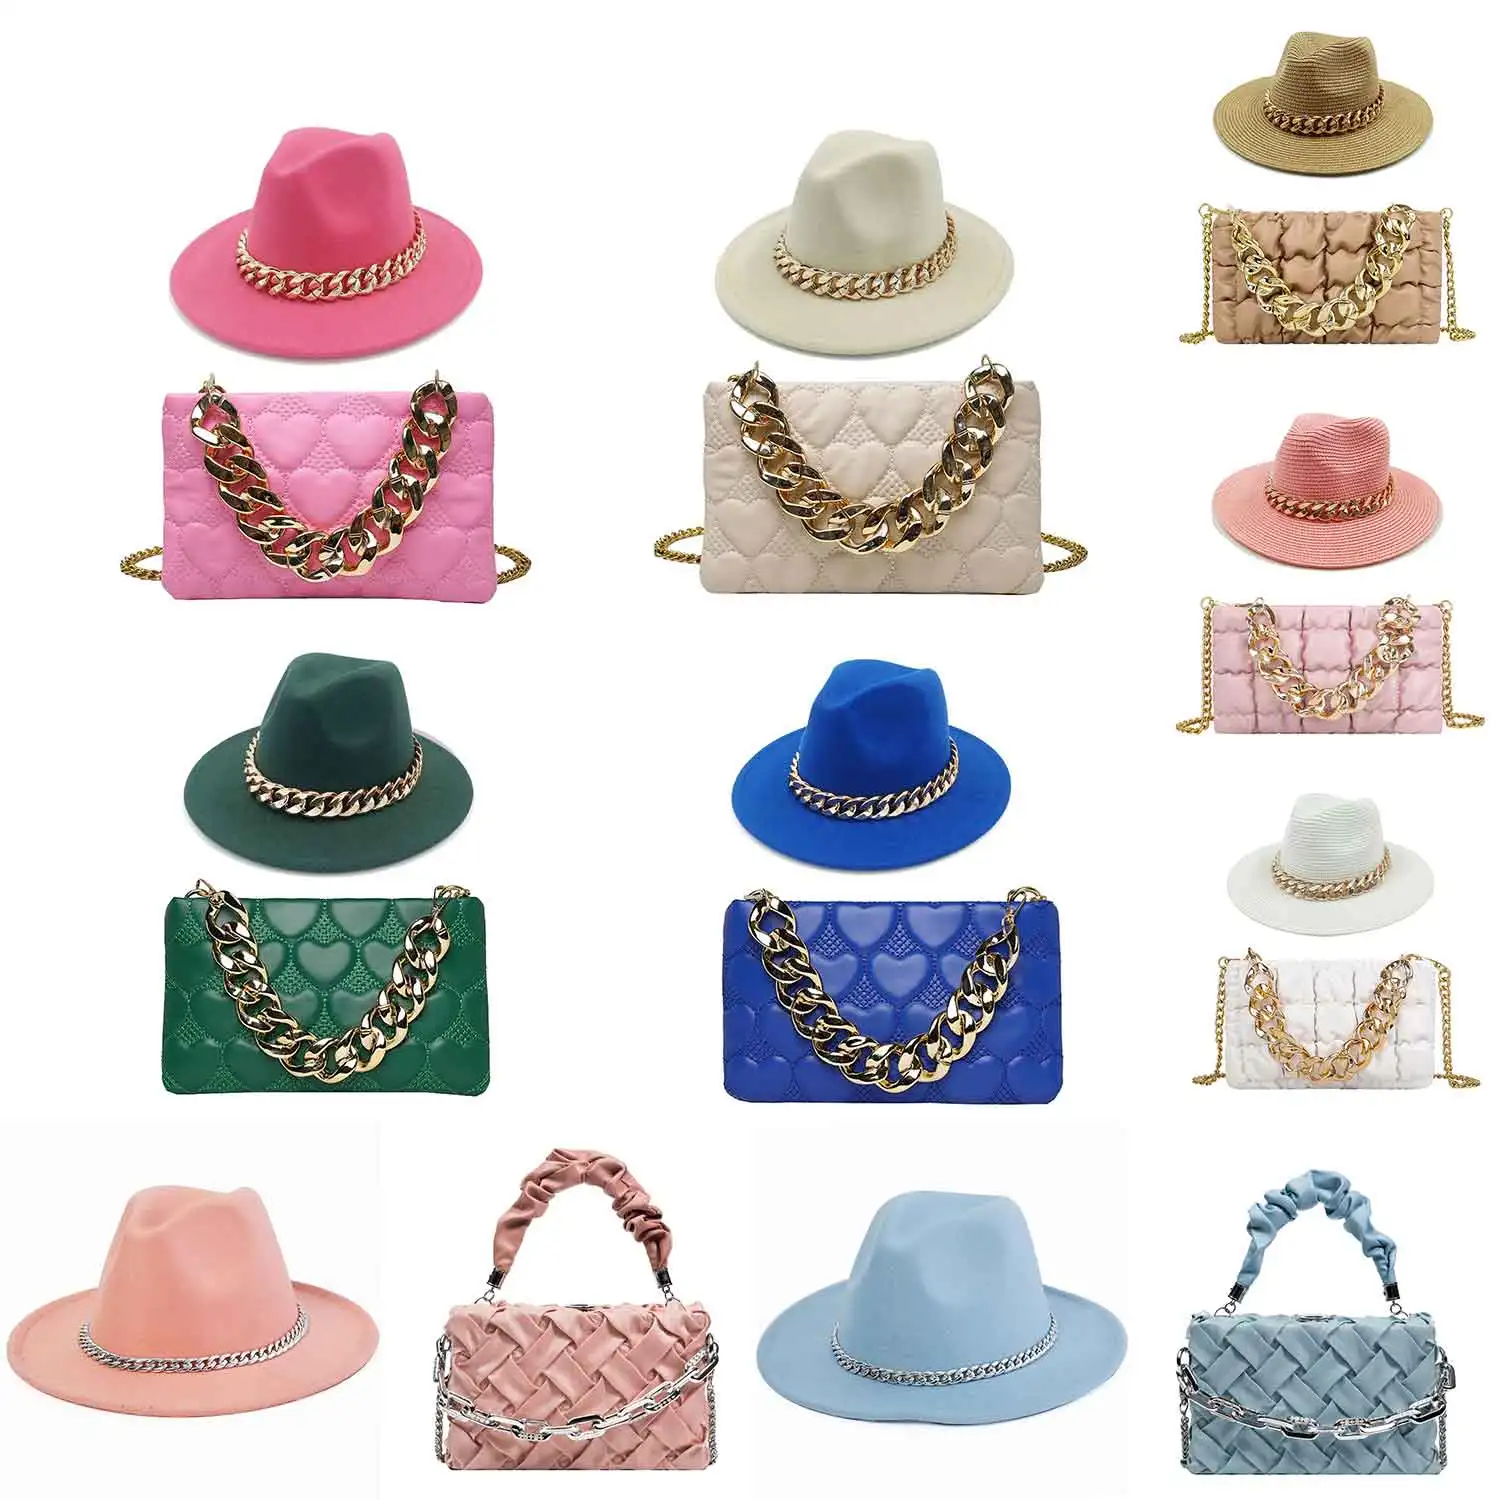 Red Fedoras Hats For Women Oversized Chain Accessory Bag Fashion Luxury New Hat Latest Chain Colorful Jazz Cap Wholesale  шапка